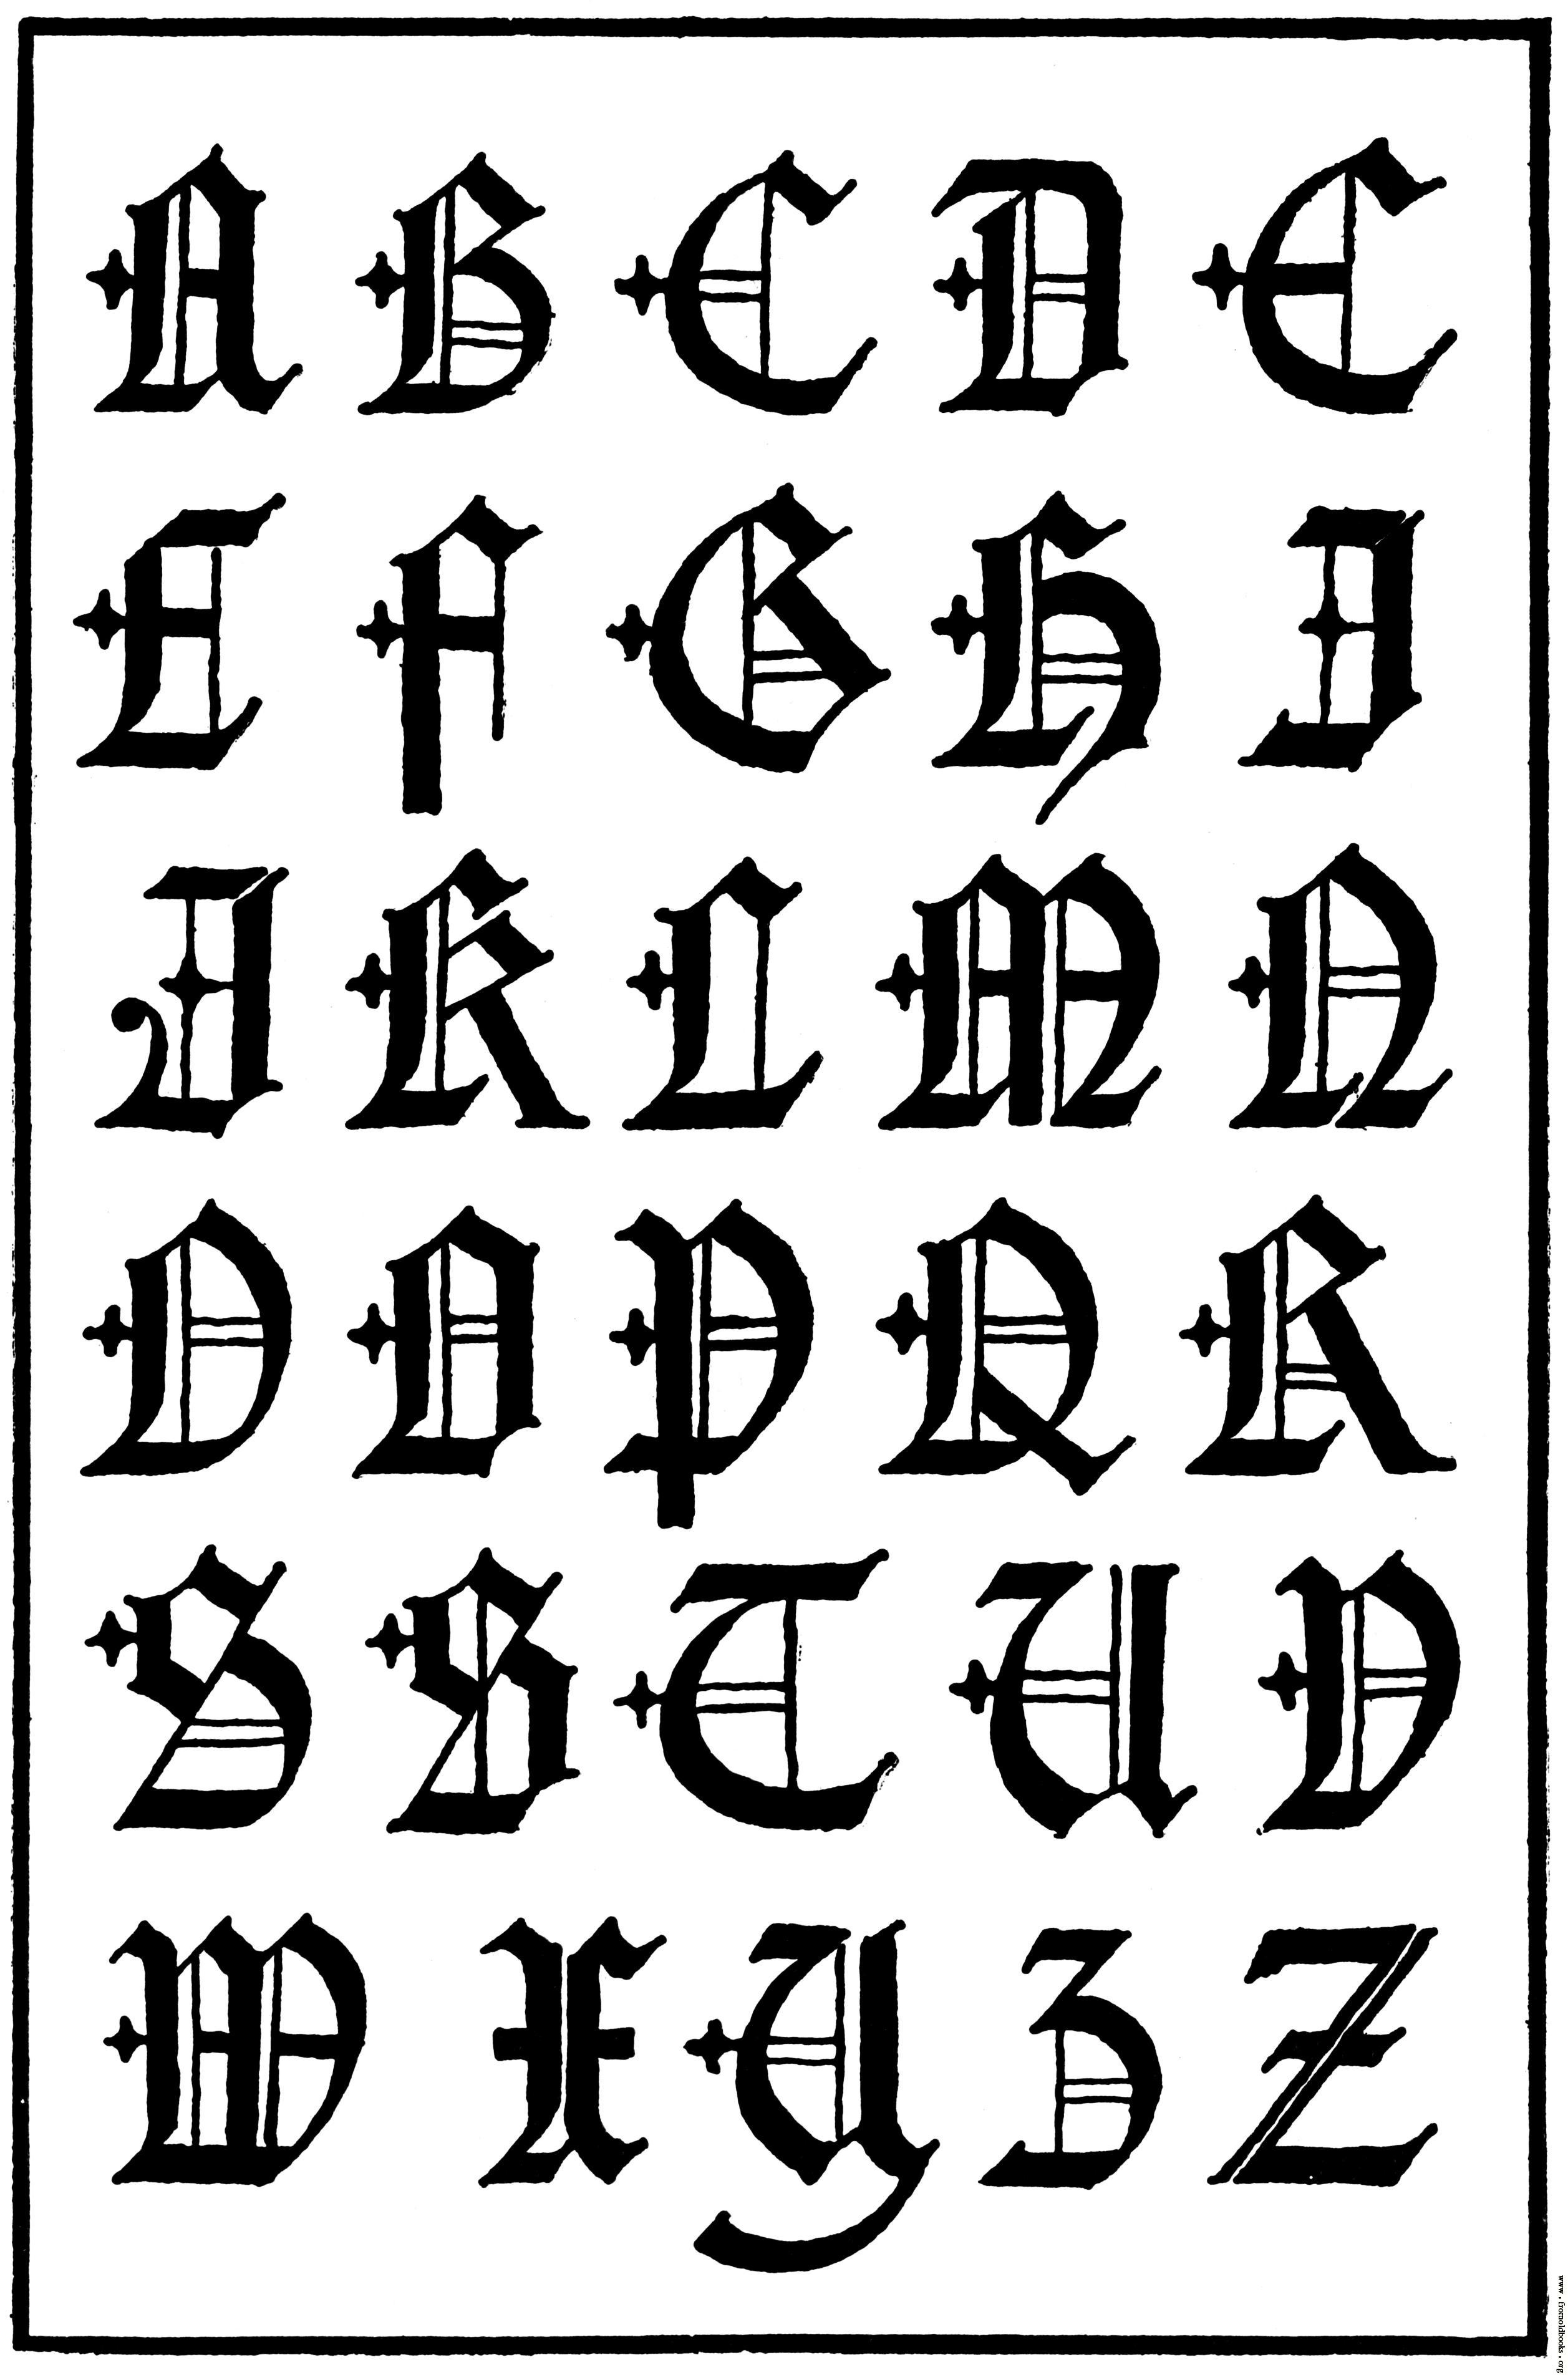 Printable Letter Templates Fonts. Printable. Free Printable Worksheets - Free Printable Old English Letters